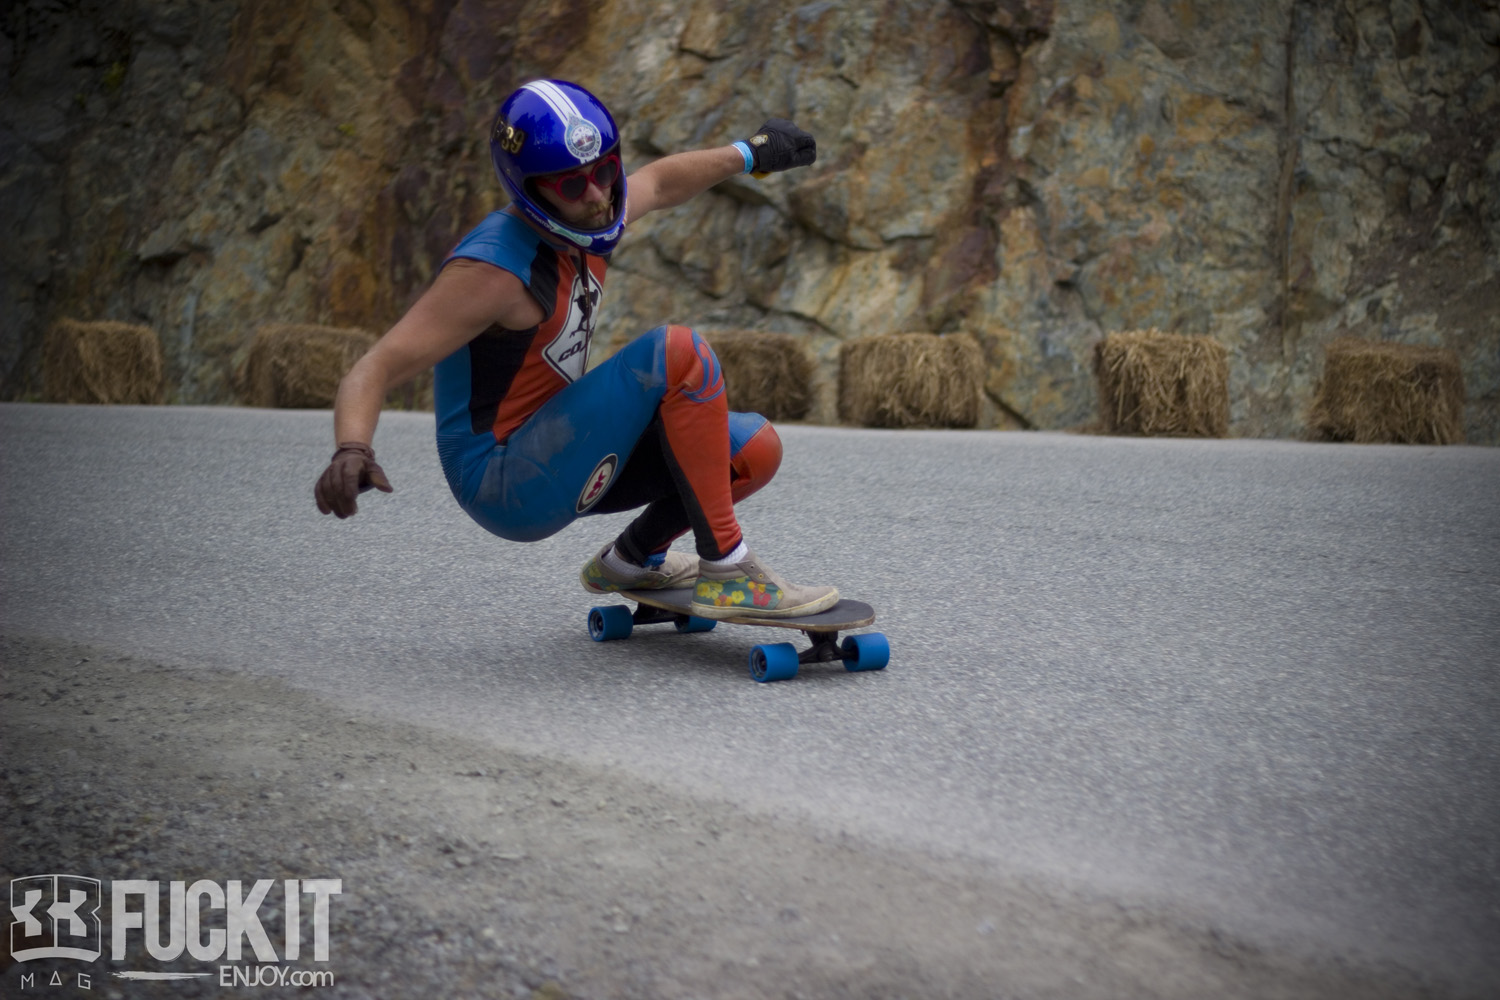 Whistler Longboard Festival Day Two Photo Gallery - Things Are Heating Up!